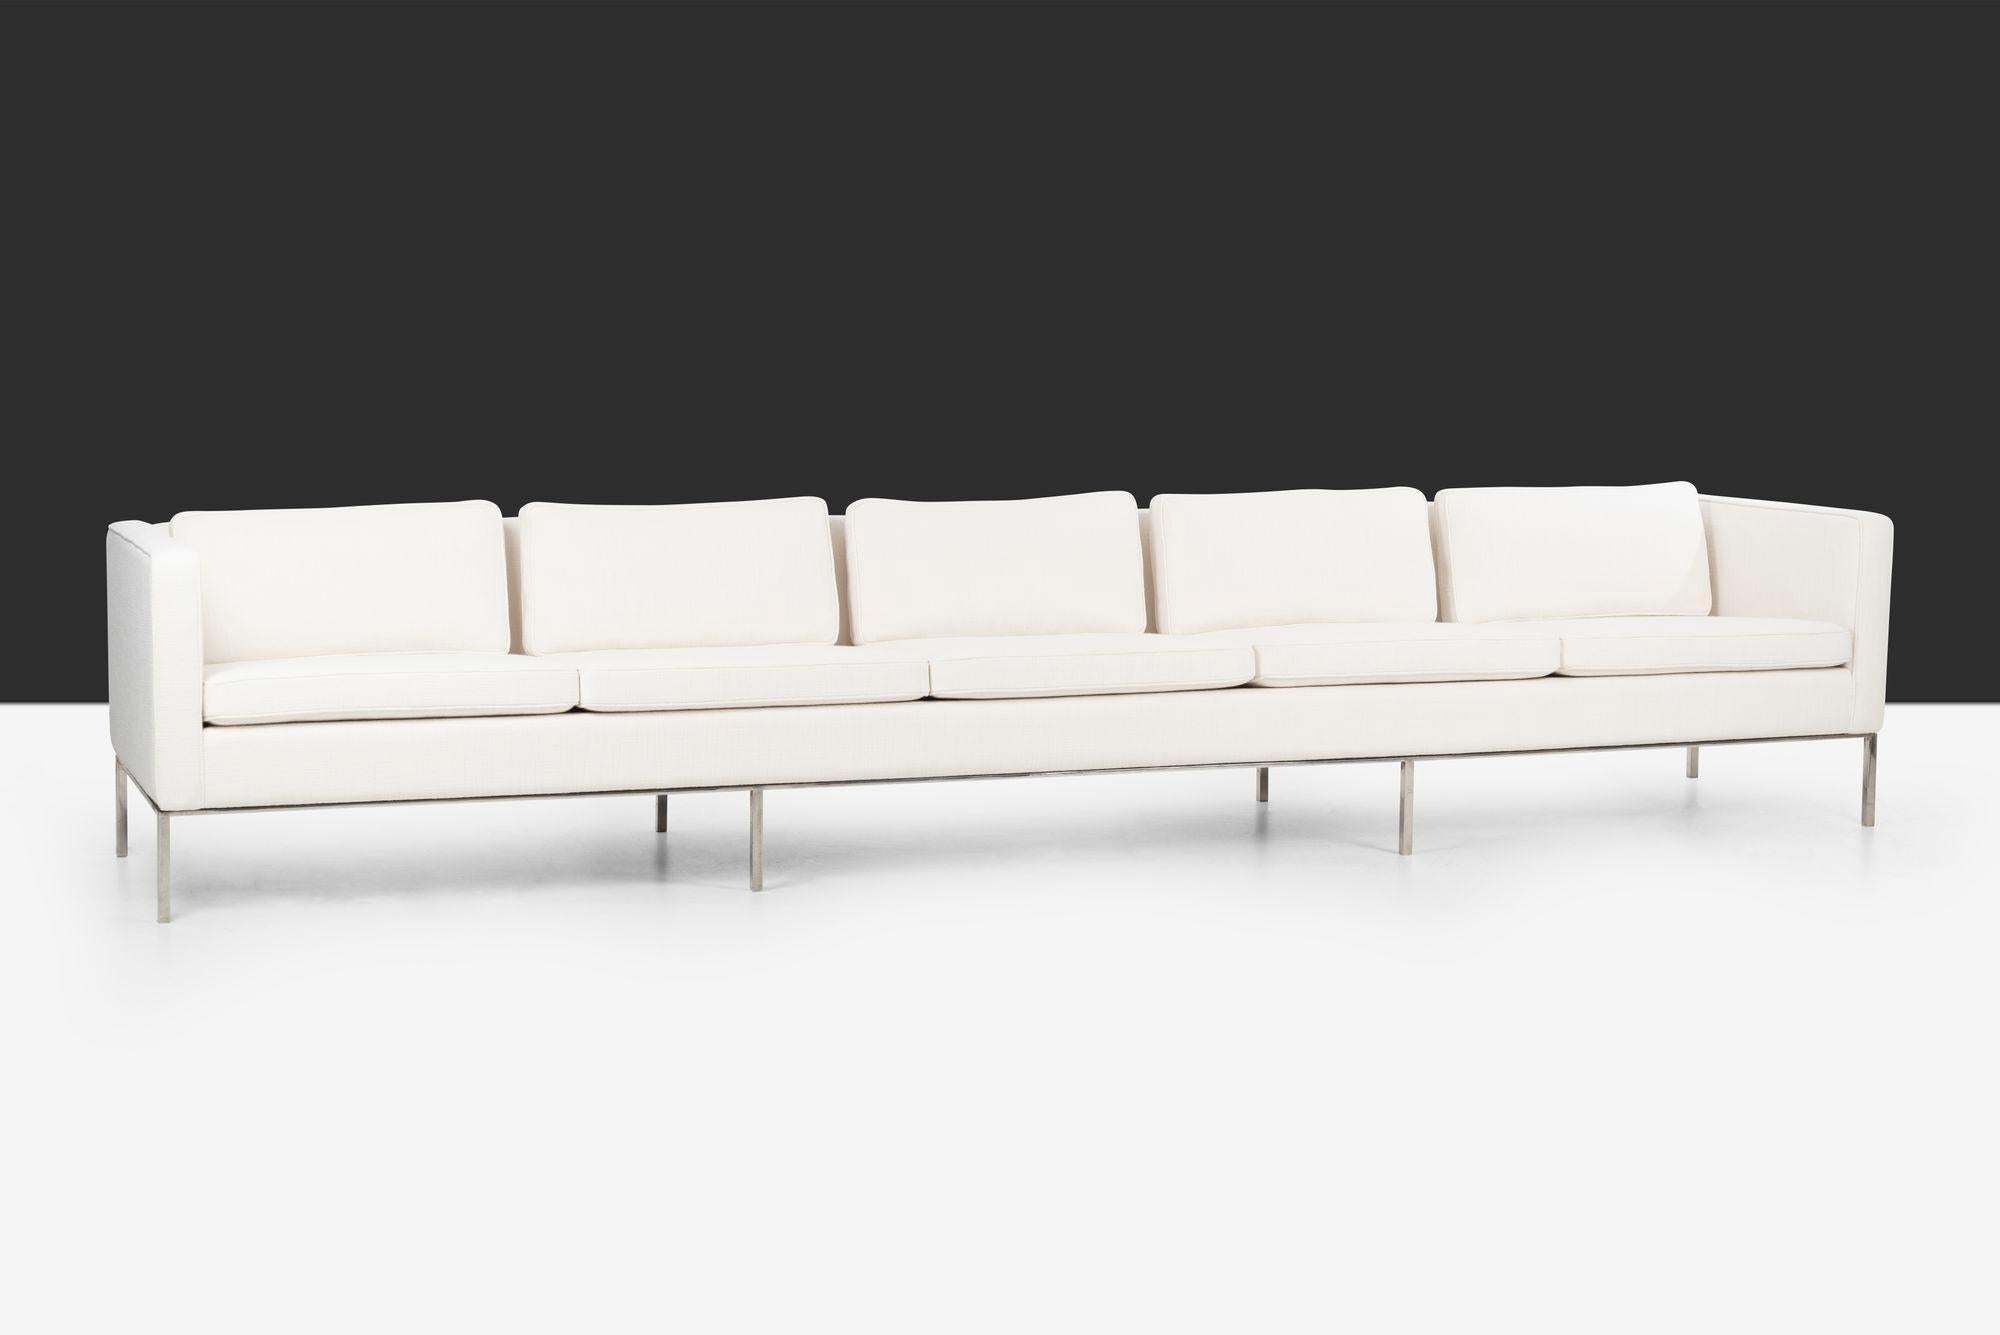 Pair of William Armbruster Monumental Five Seat Sofas in Chase Manhattan NYC
Armbruster included in MoMA's Good Design exhibits in the early 50's and lauded by such figures as George Nelson. His company, Edgewood Furniture, competed with Knoll in